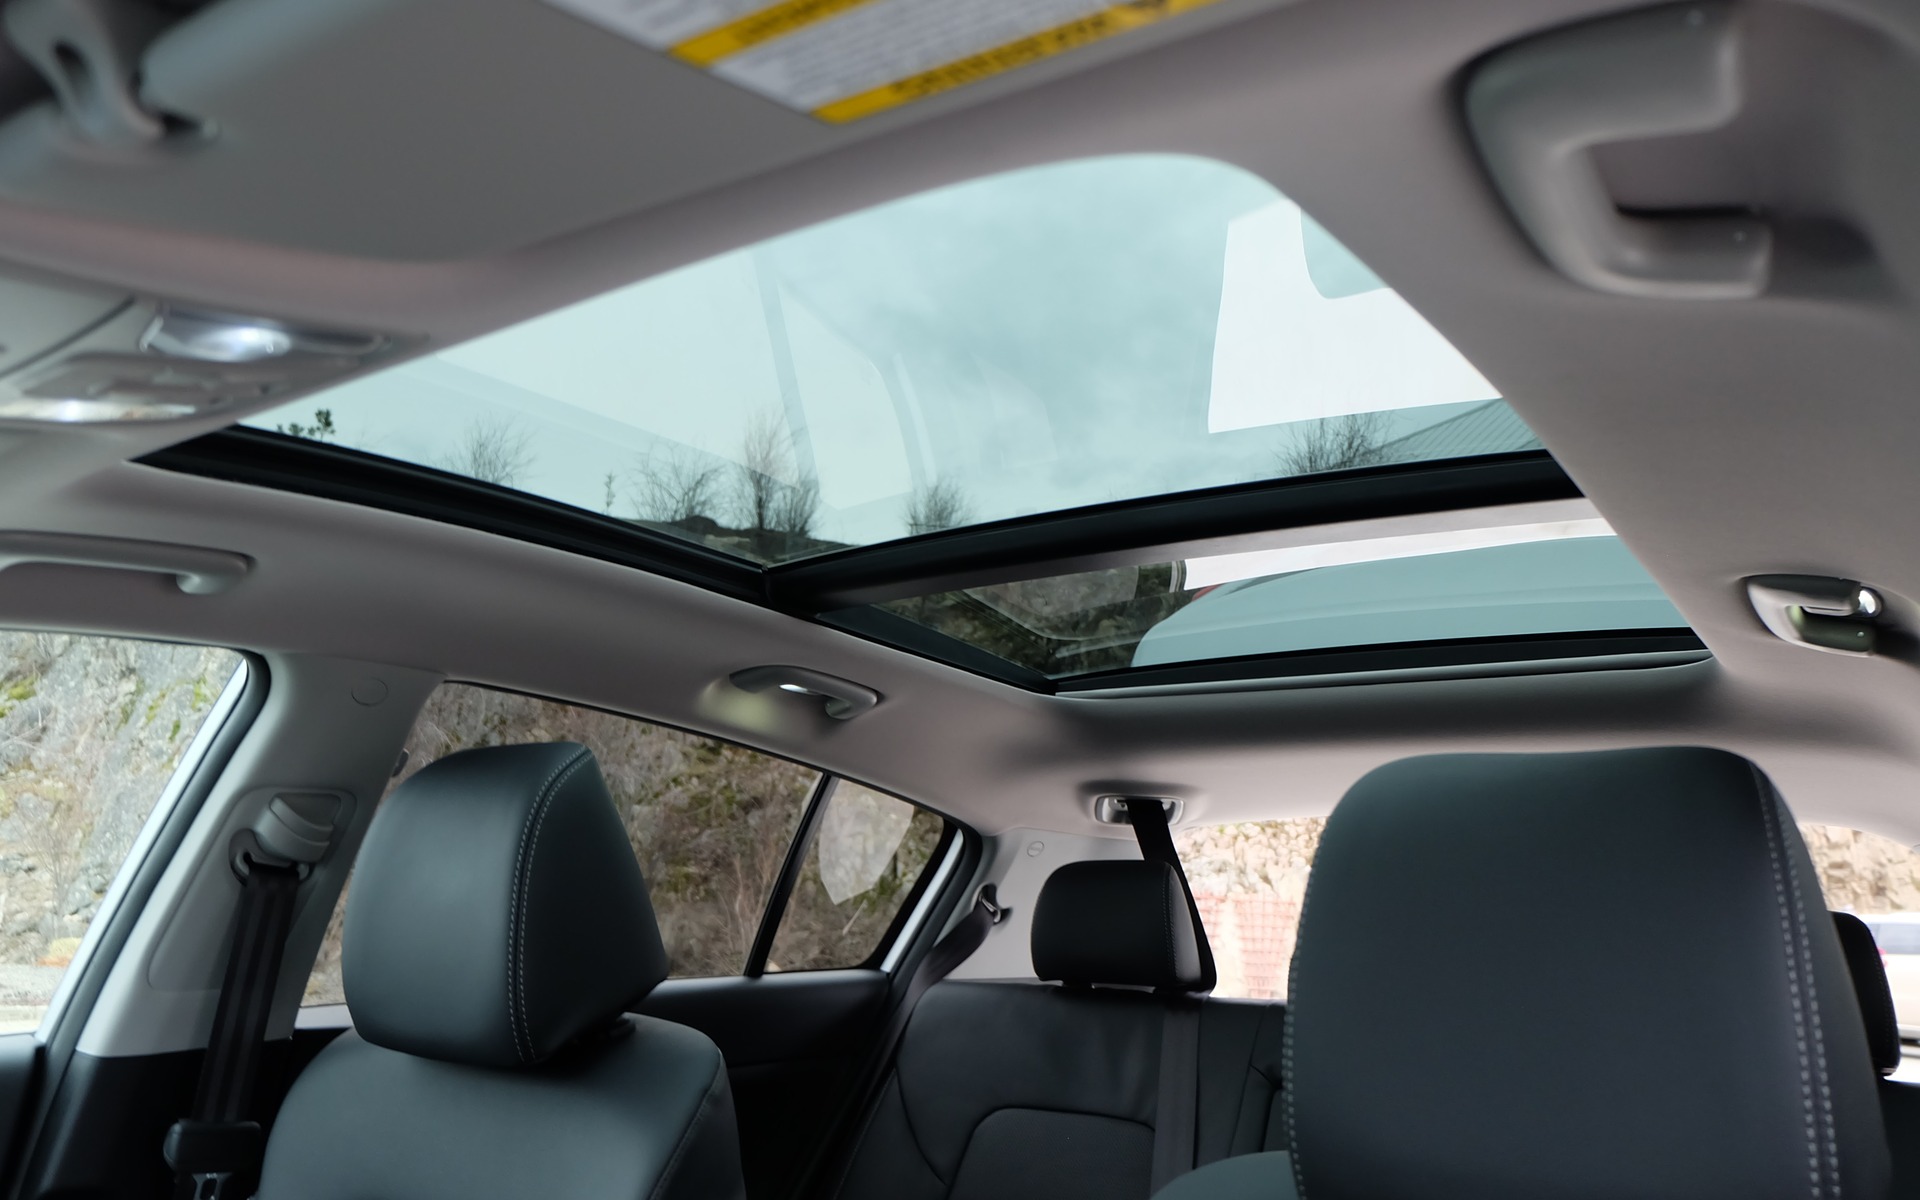  An optional gigantic glass roof in the 2017 Kia Sportage.